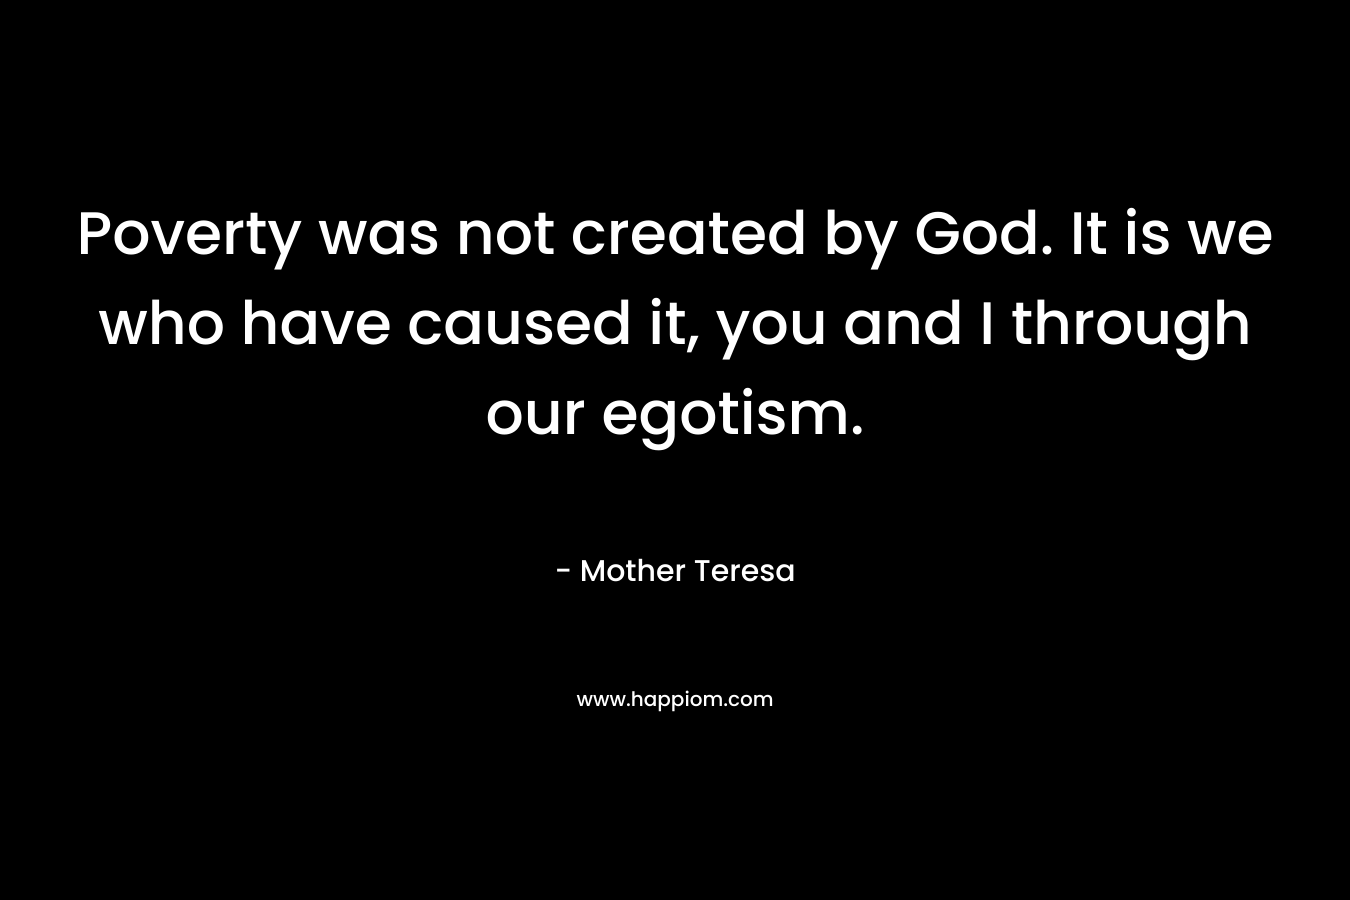 Poverty was not created by God. It is we who have caused it, you and I through our egotism.